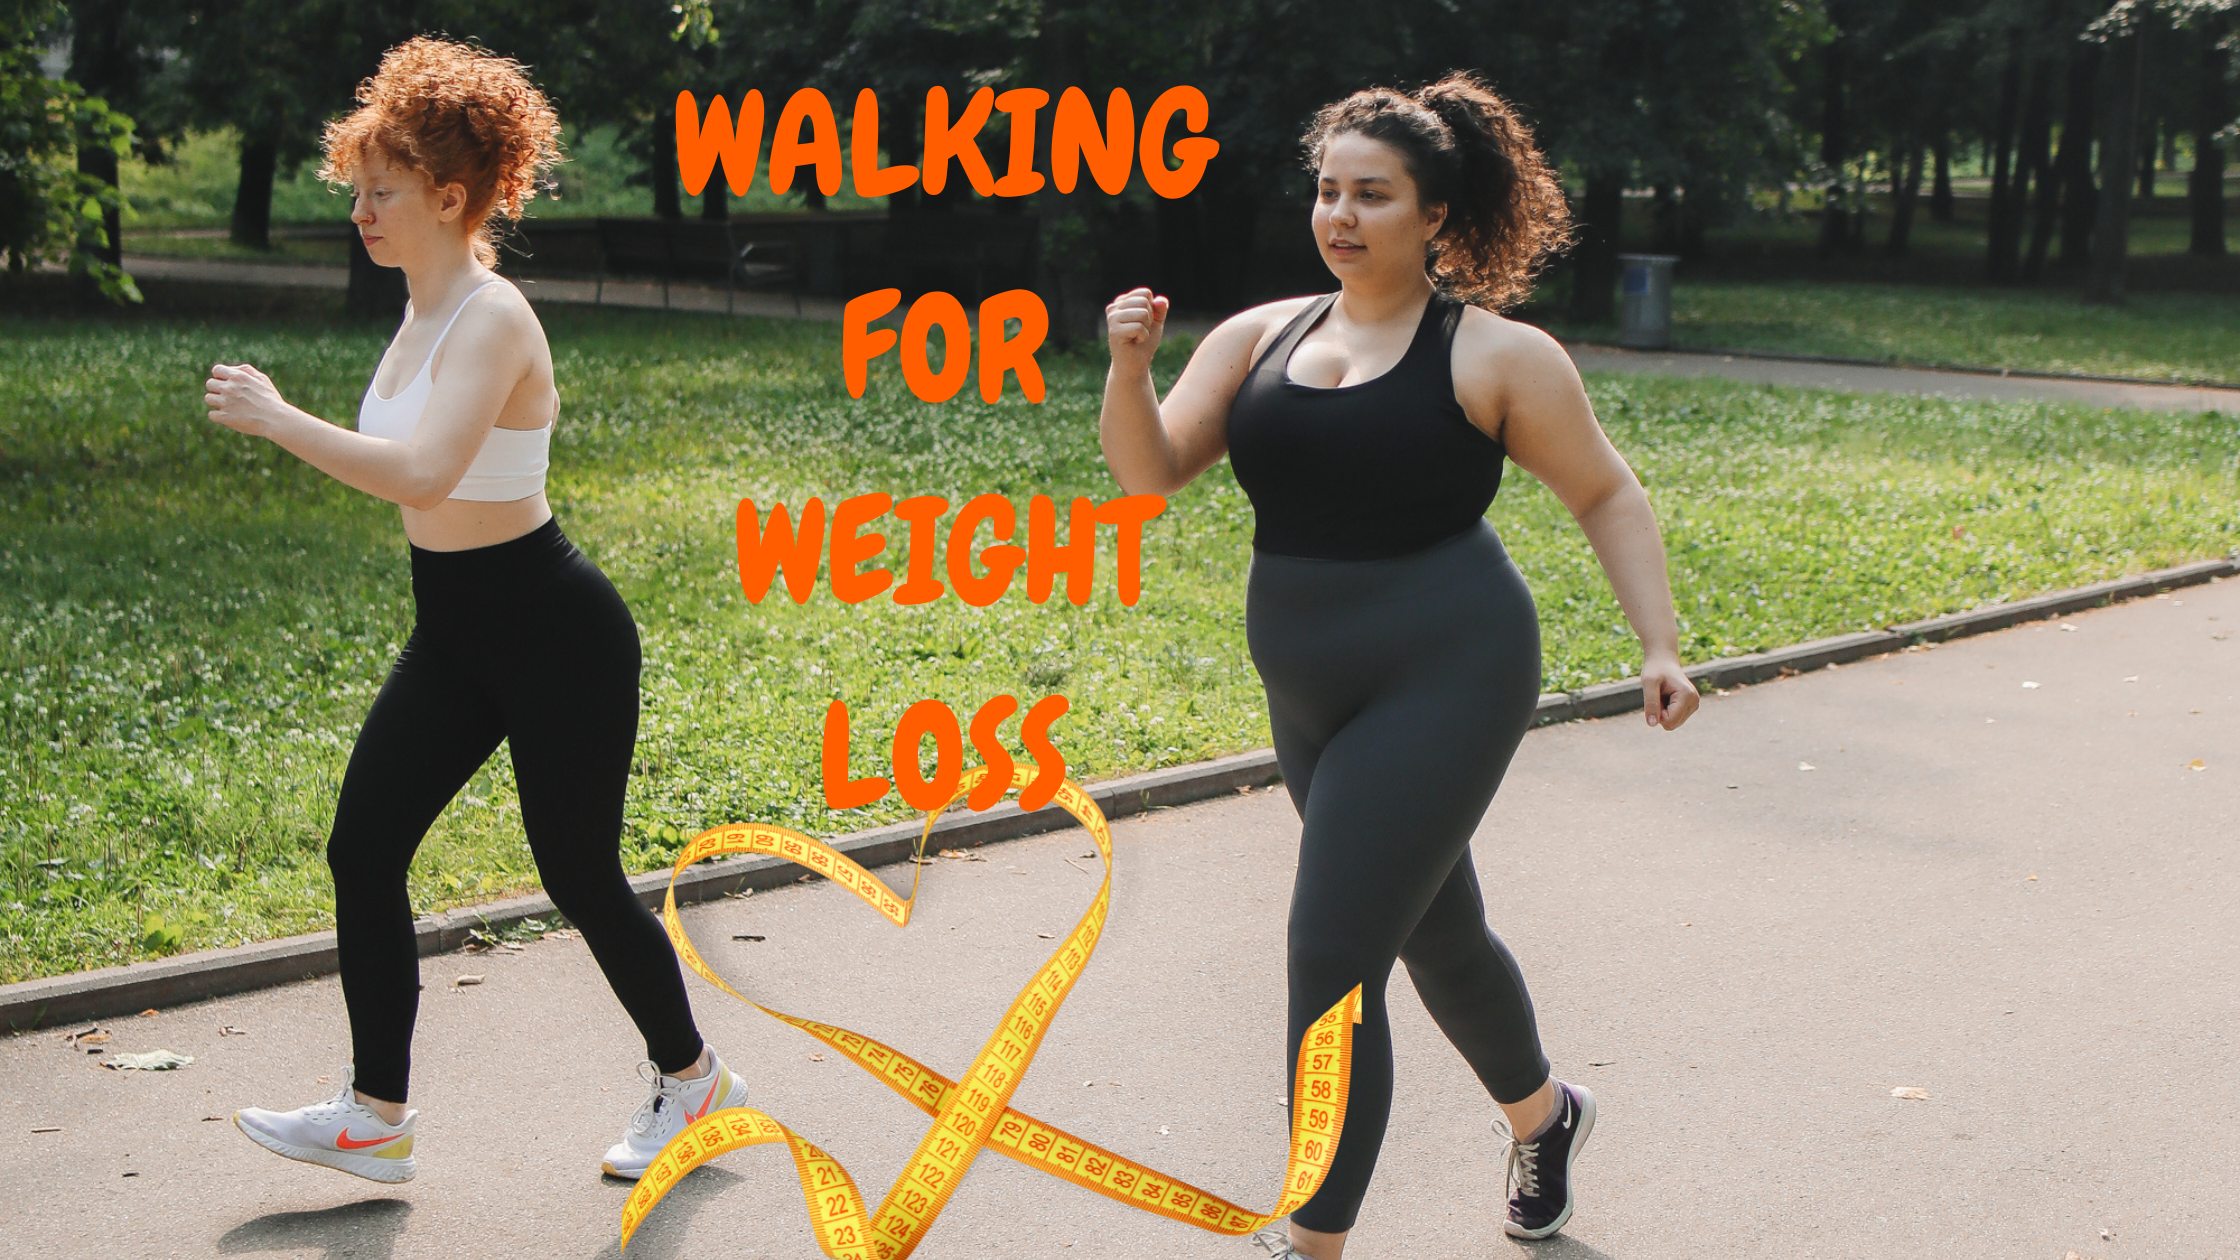 Walking for weight loss